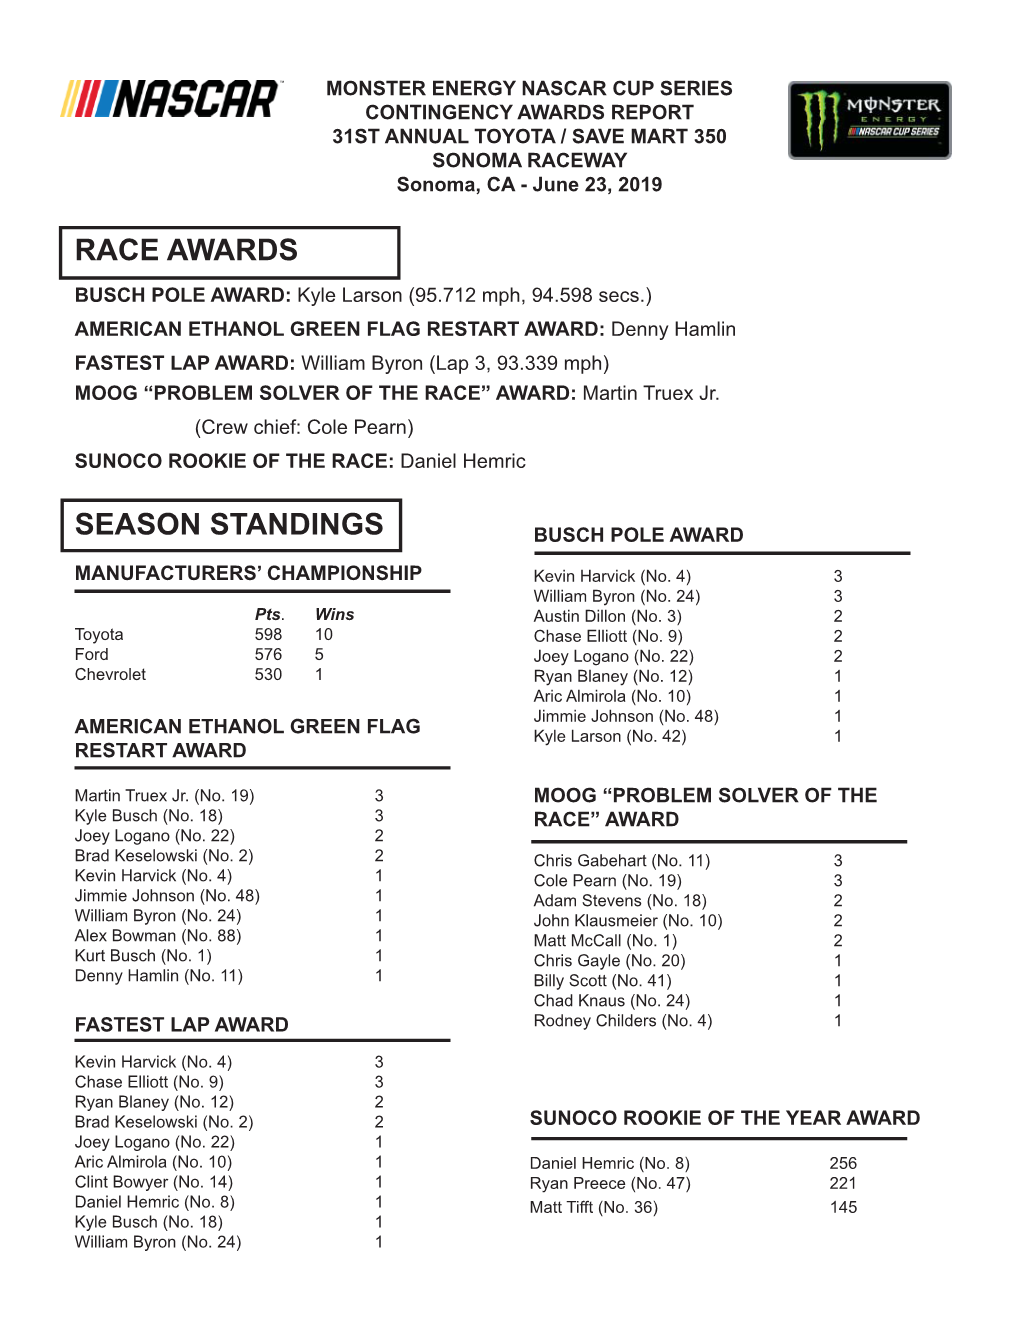 CONTINGENCY AWARDS REPORT 31ST ANNUAL TOYOTA / SAVE MART 350 SONOMA RACEWAY Sonoma, CA - June 23, 2019